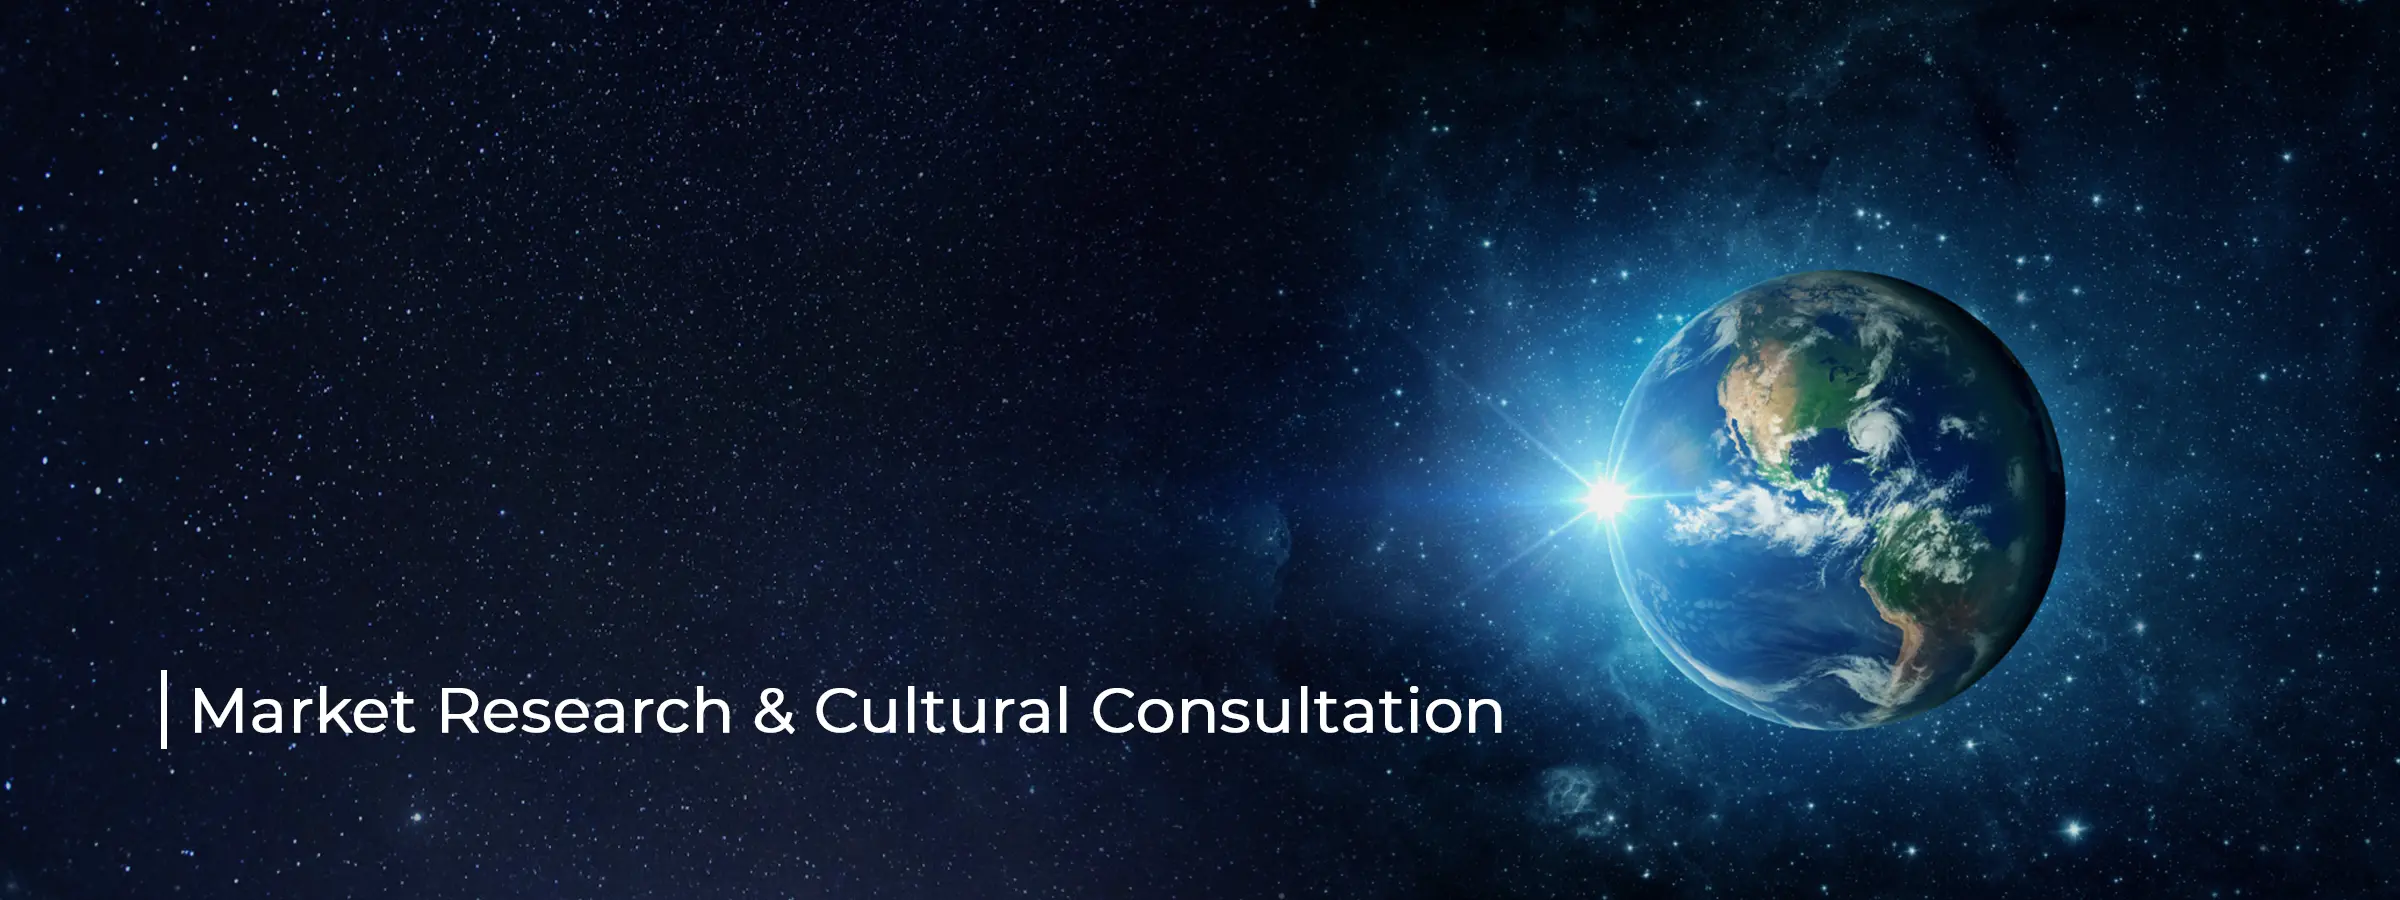 market-research-and-cultural-consultation-industry-banner